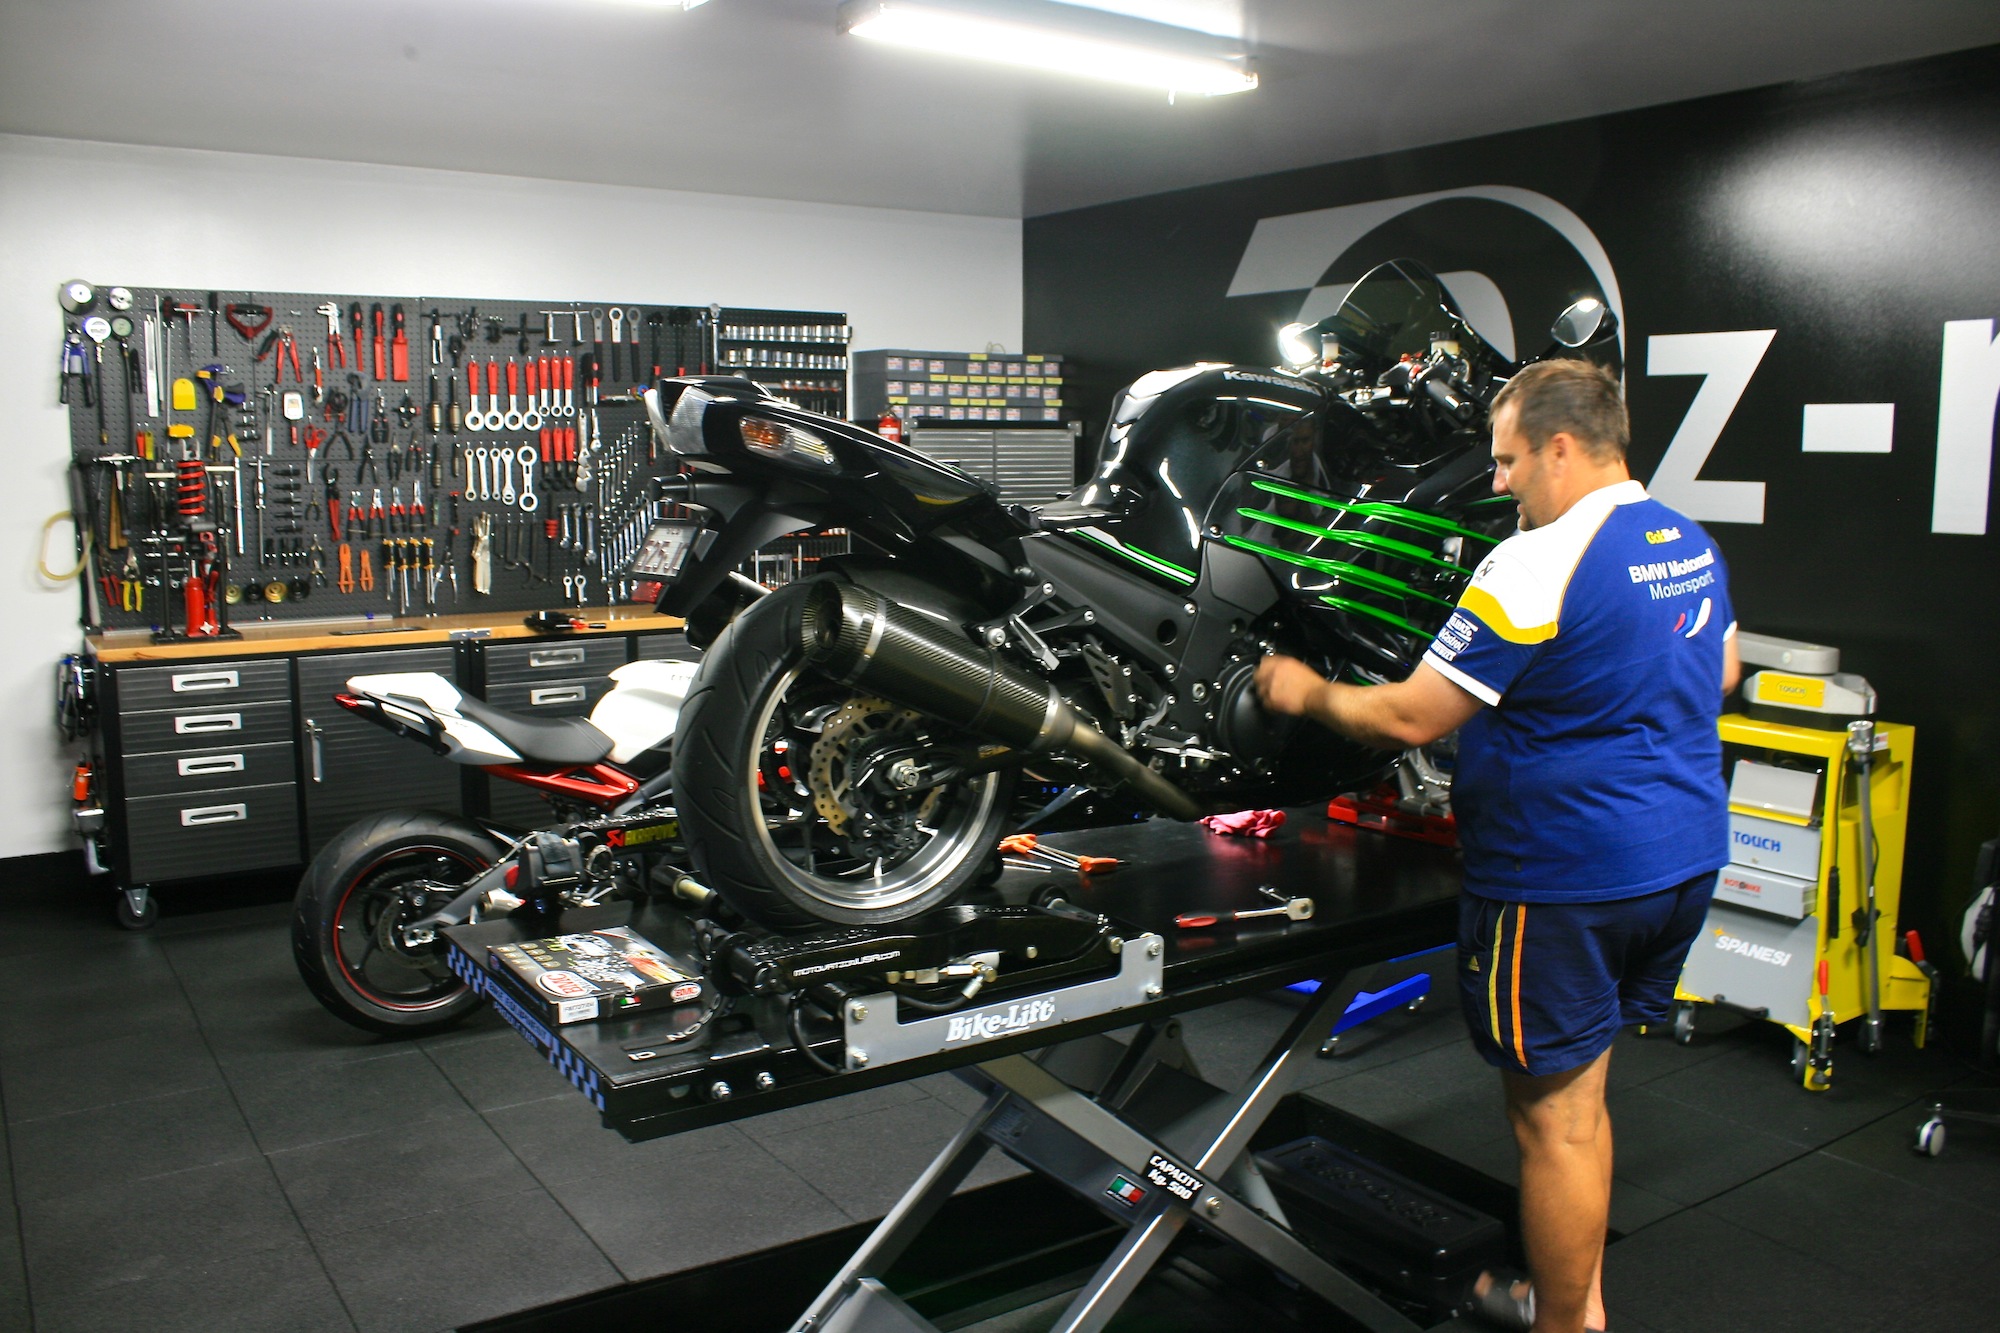 Ozzy Graf servicing a motorcycle in the Oz-racing workshop